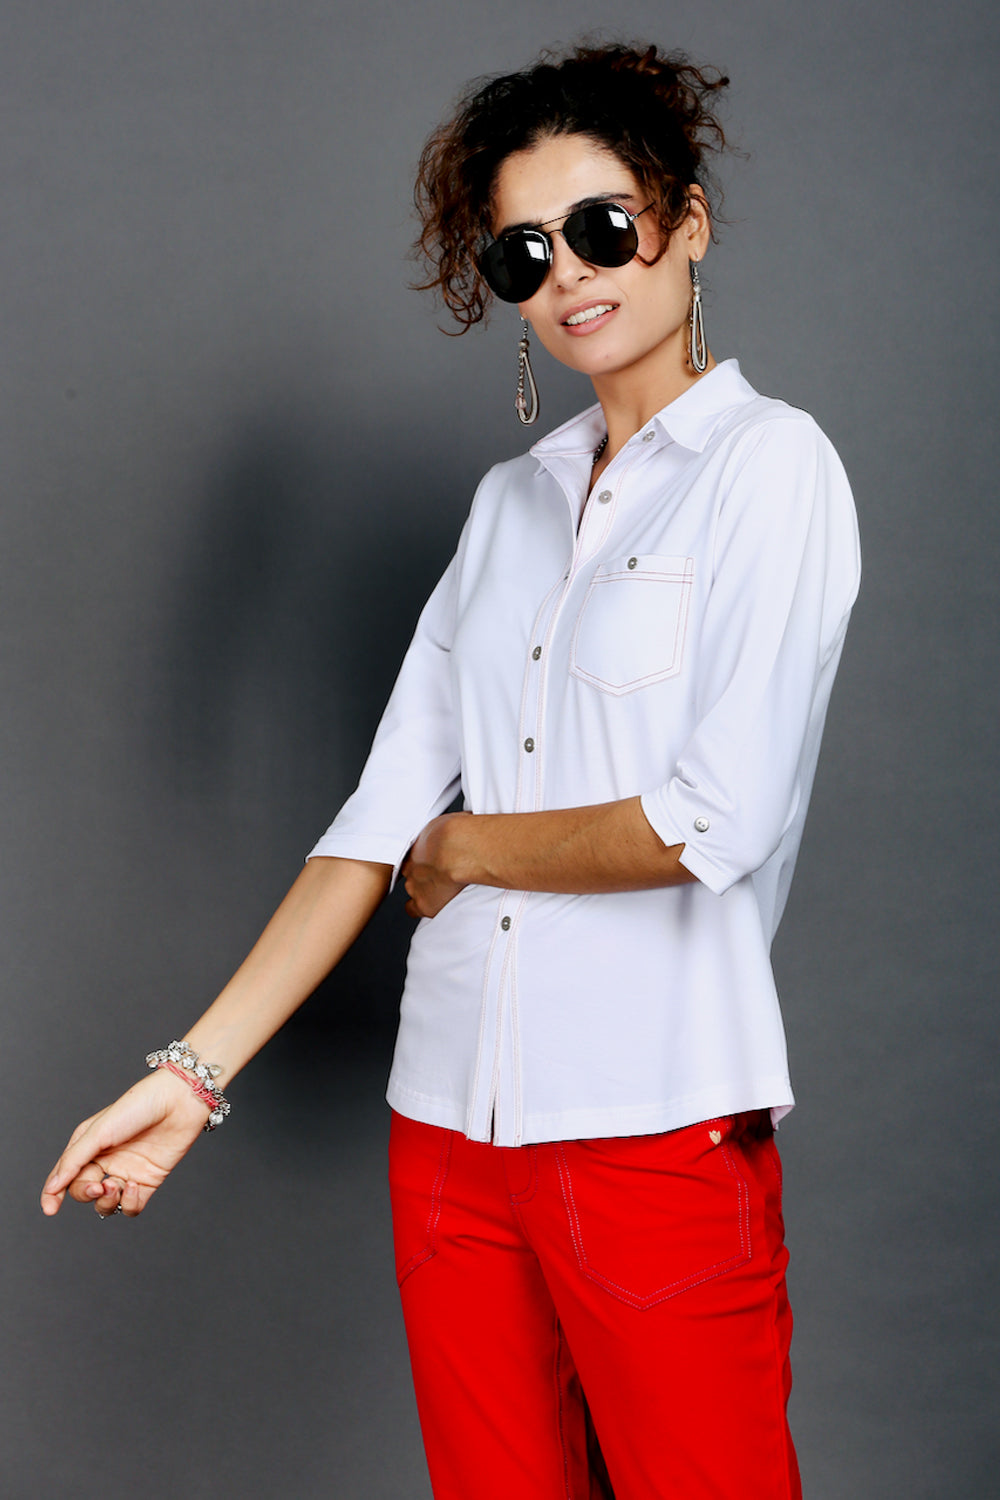 Is RED really the best color to wear under a white shirt for no show?